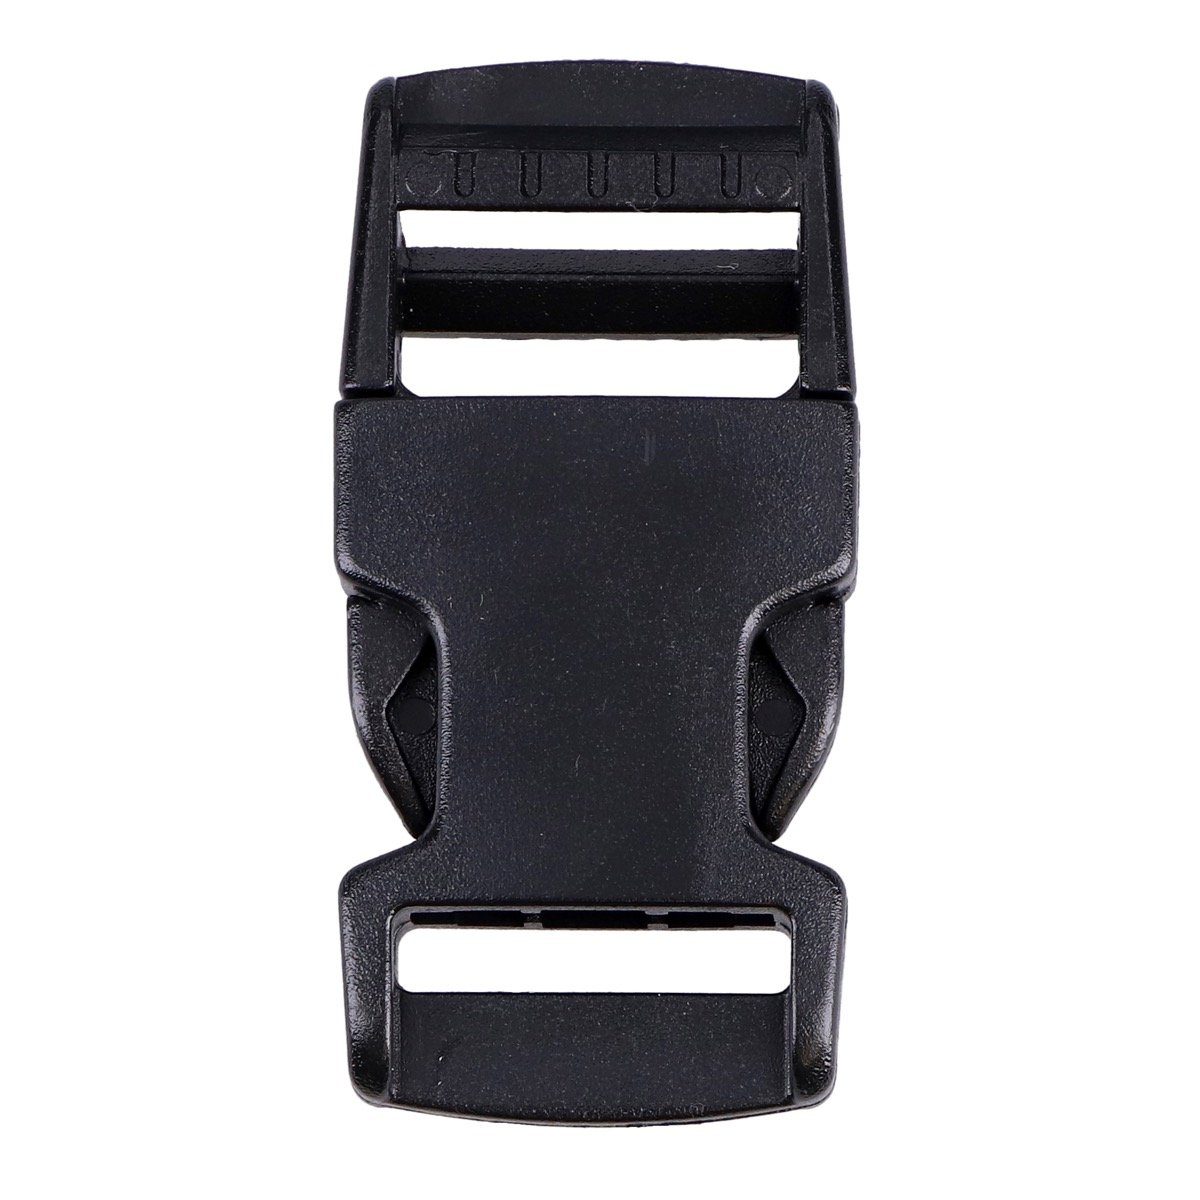 Release Buckle Plastic Paracord Webbing Strap Snap Clasp SIZE# 1" or 25 mm.